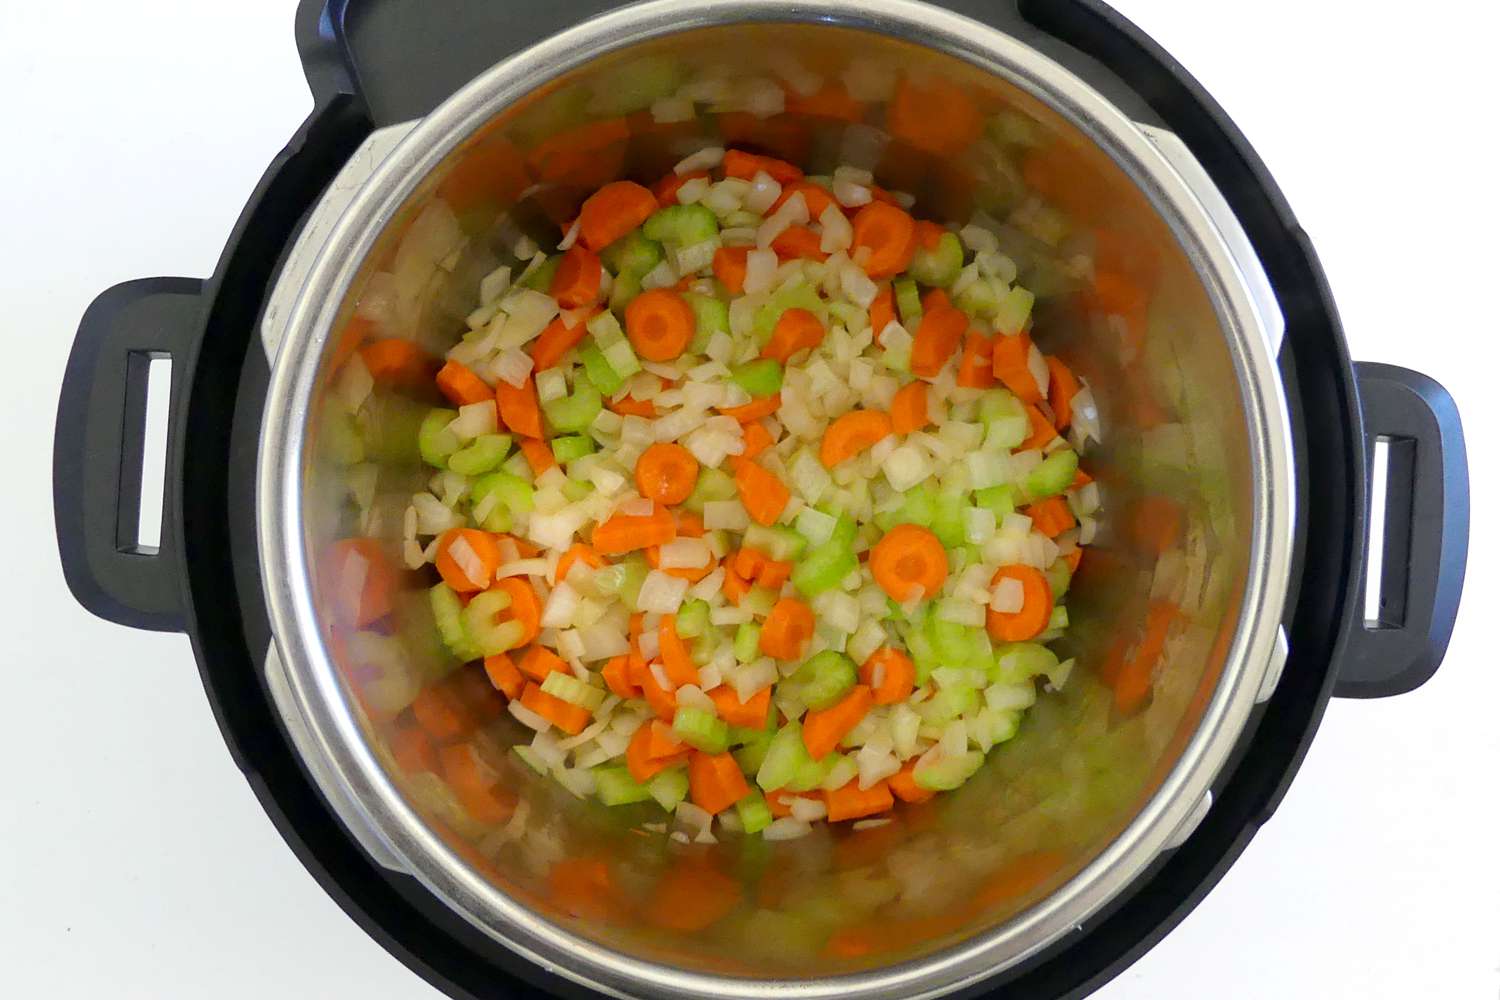 Saute the onion, carrot, and celery